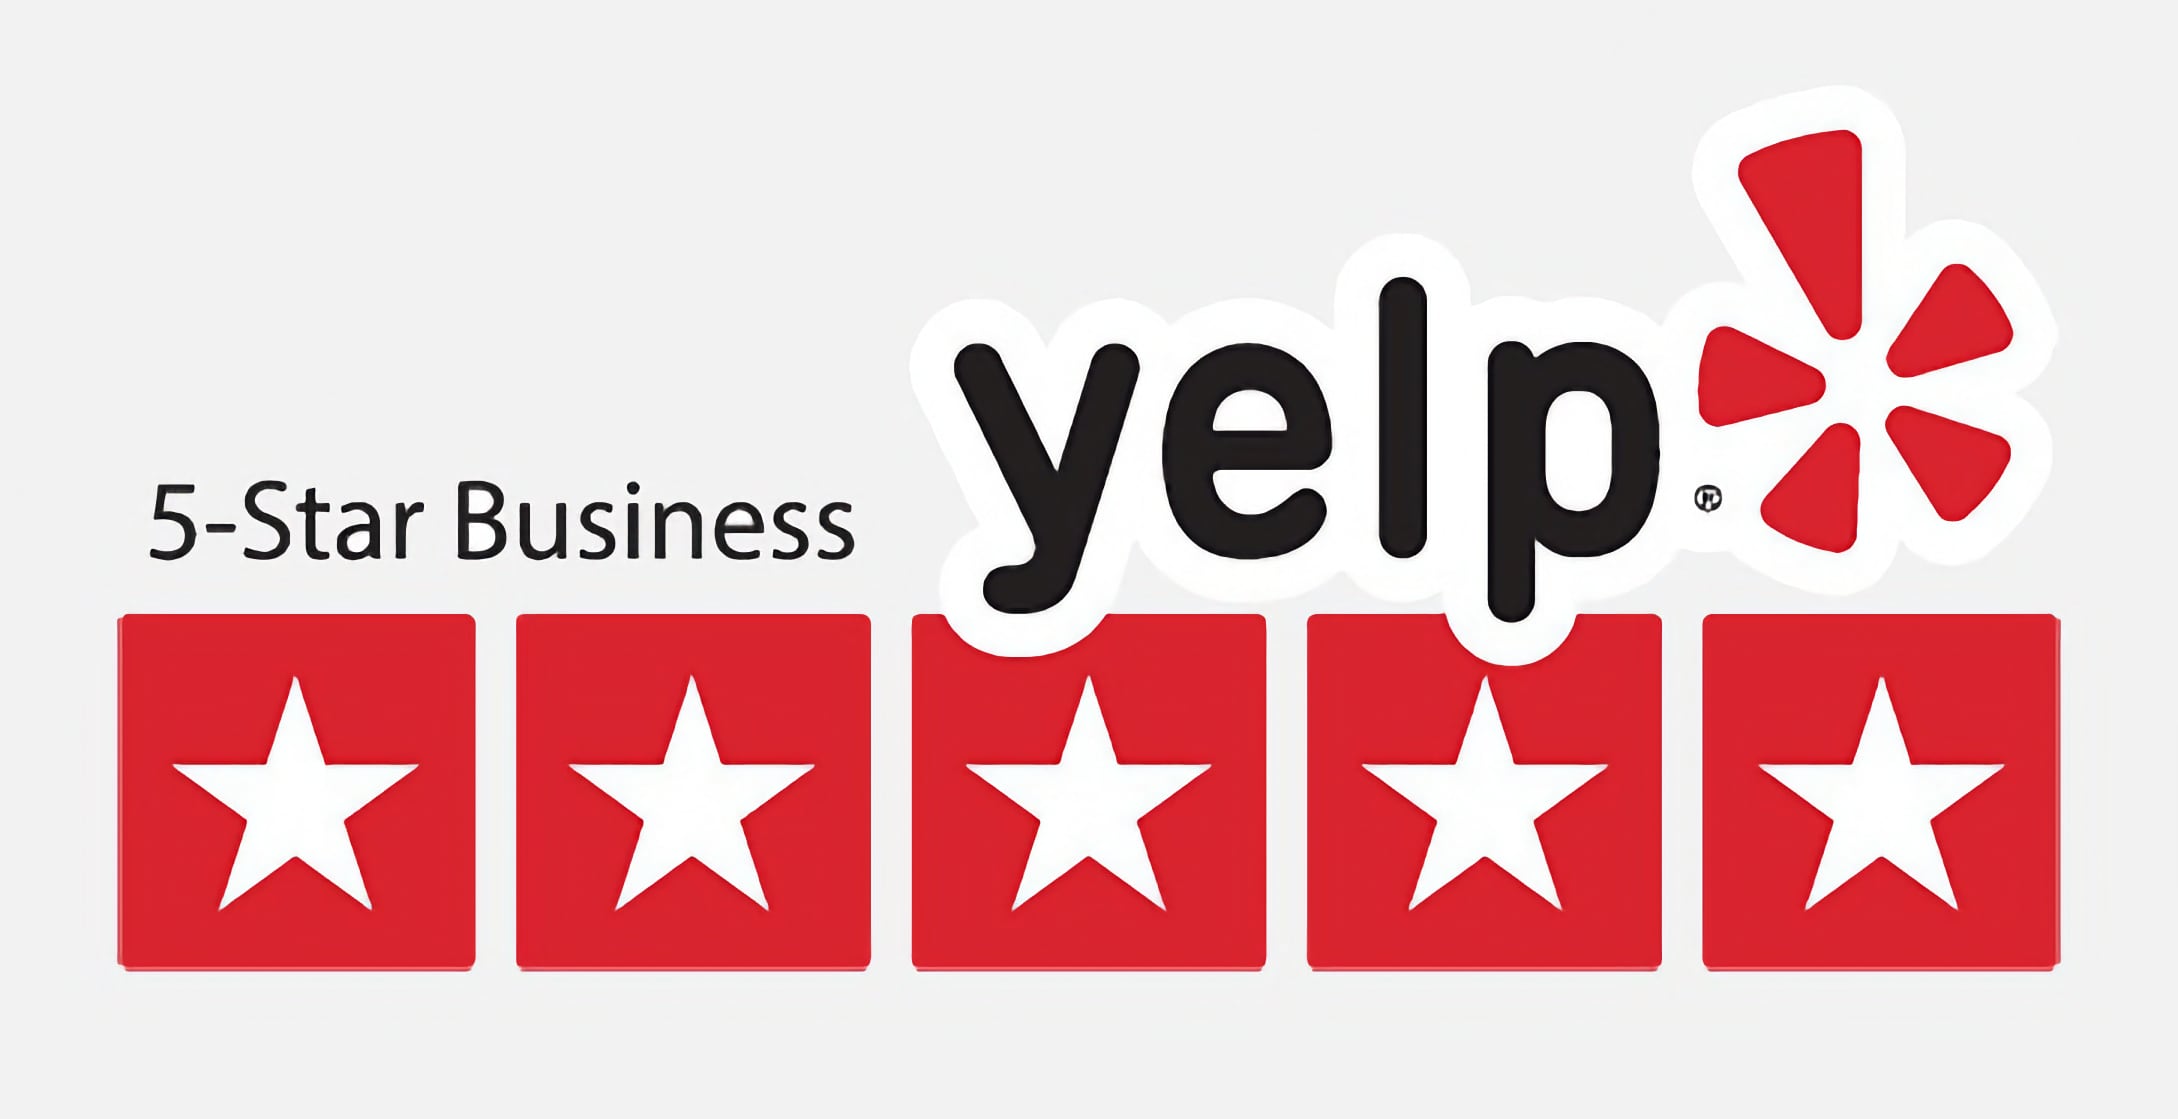 Prince Charters is rated 5-stars on Yelp!